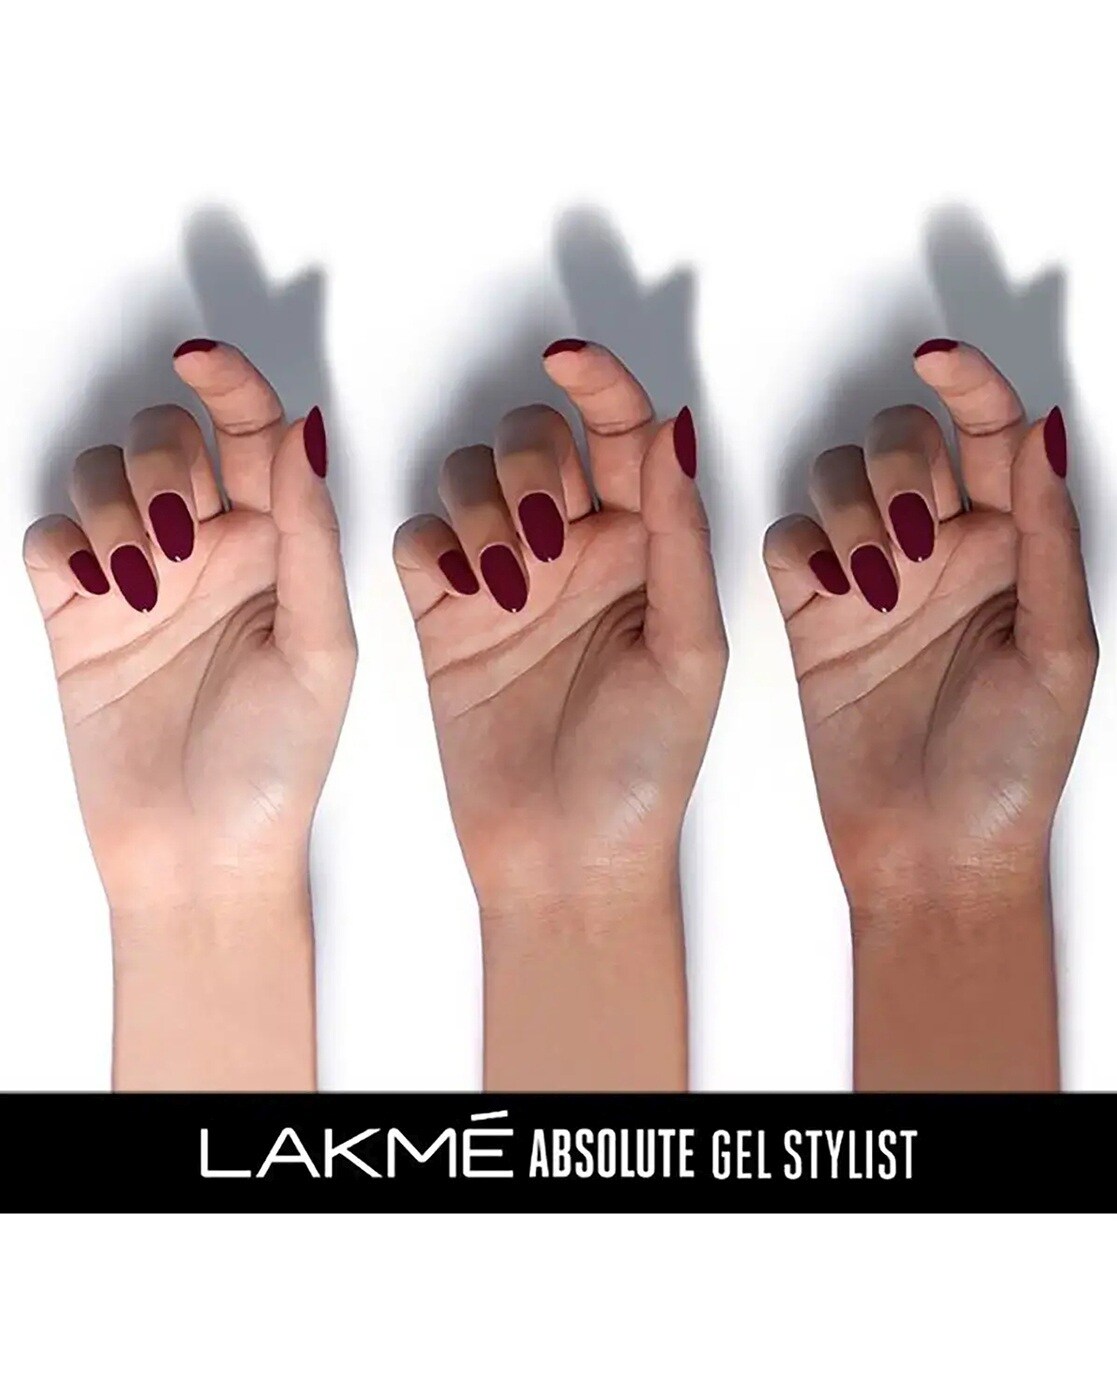 I Love Lakme - Turn everyone 'Verdure' 💚 with envy with flawless nails!  💅🏼​ ⁠Ft. Absolute Gel Stylist Nail Polish in the shade Verdure​ ​🛒 now:  https://lakmeindia.com/products/lakme-absolute-gel-stylist?_pos=1&_sid=e857bf87d&_ss=r  ​#LakmeAbsolute ...